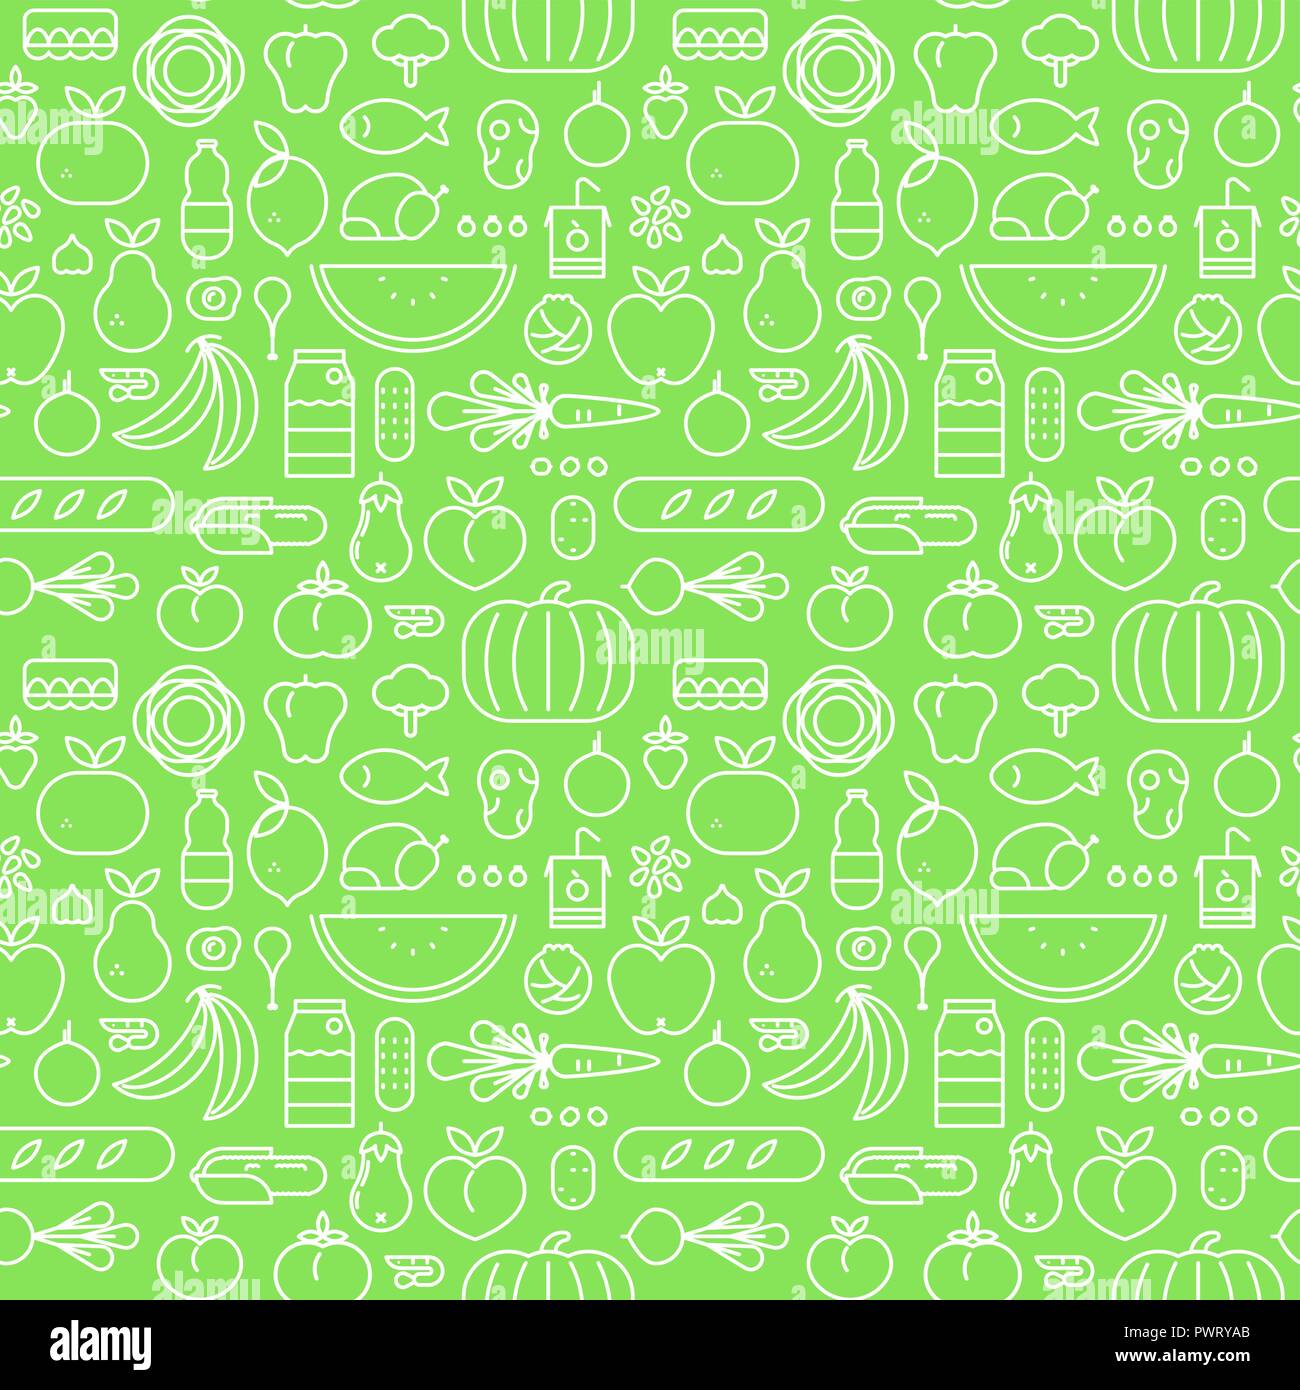 Food icon seamless pattern with green outline symbols. Healthy eating or organic nutrition concept background. Includes fruit, vegetables, meat, bread Stock Vector